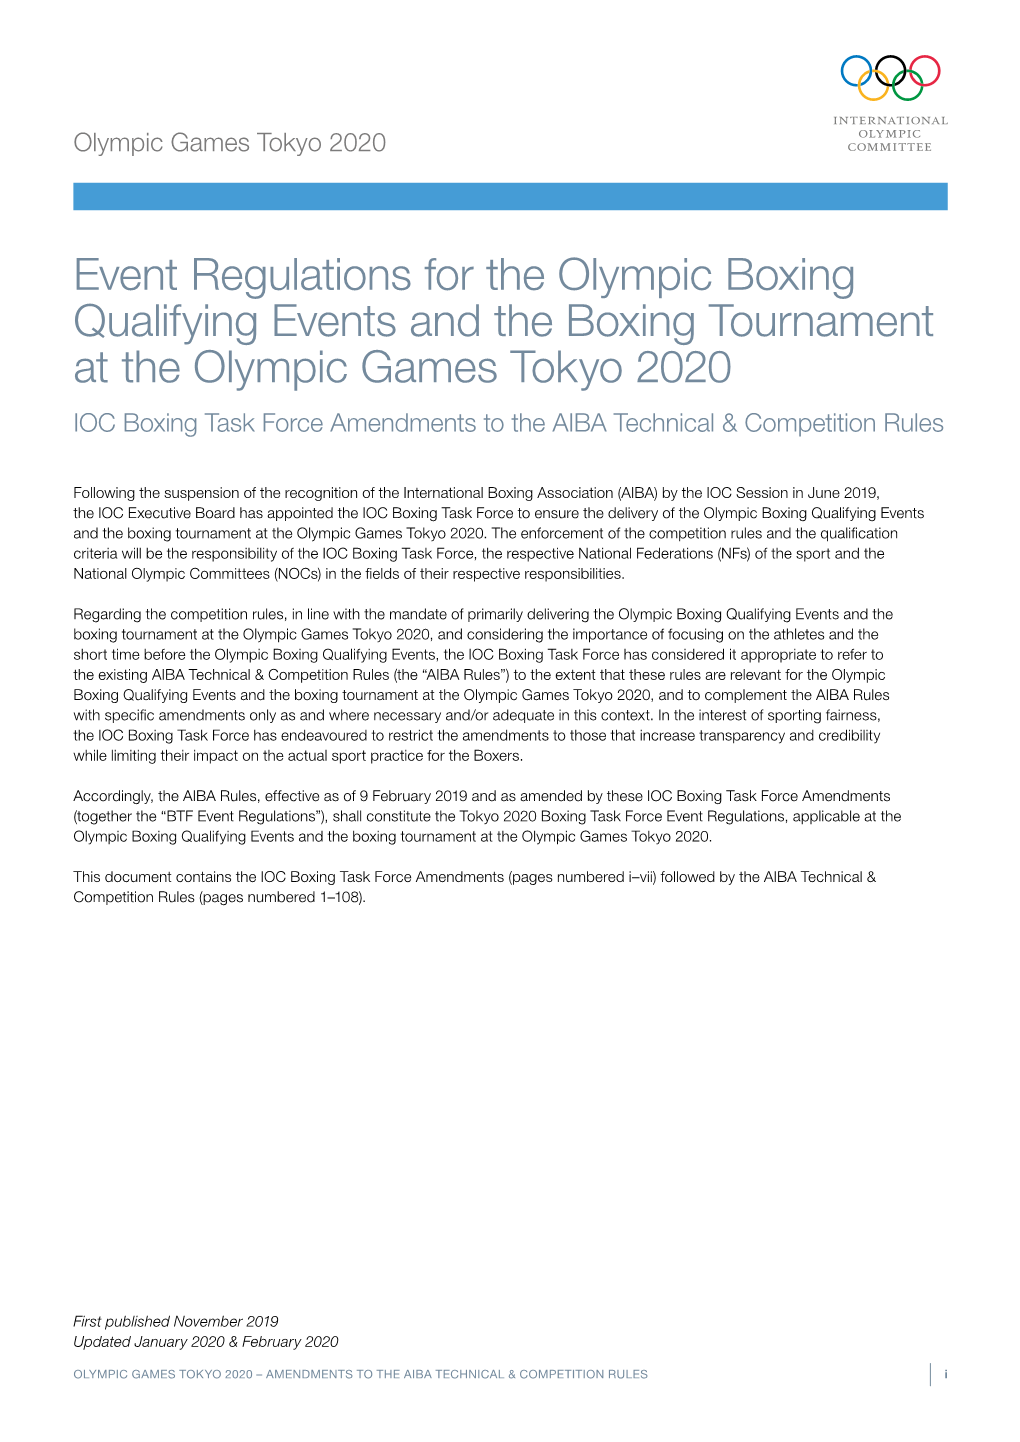 Olympic Games Tokyo 2020 Boxing Event Regulations